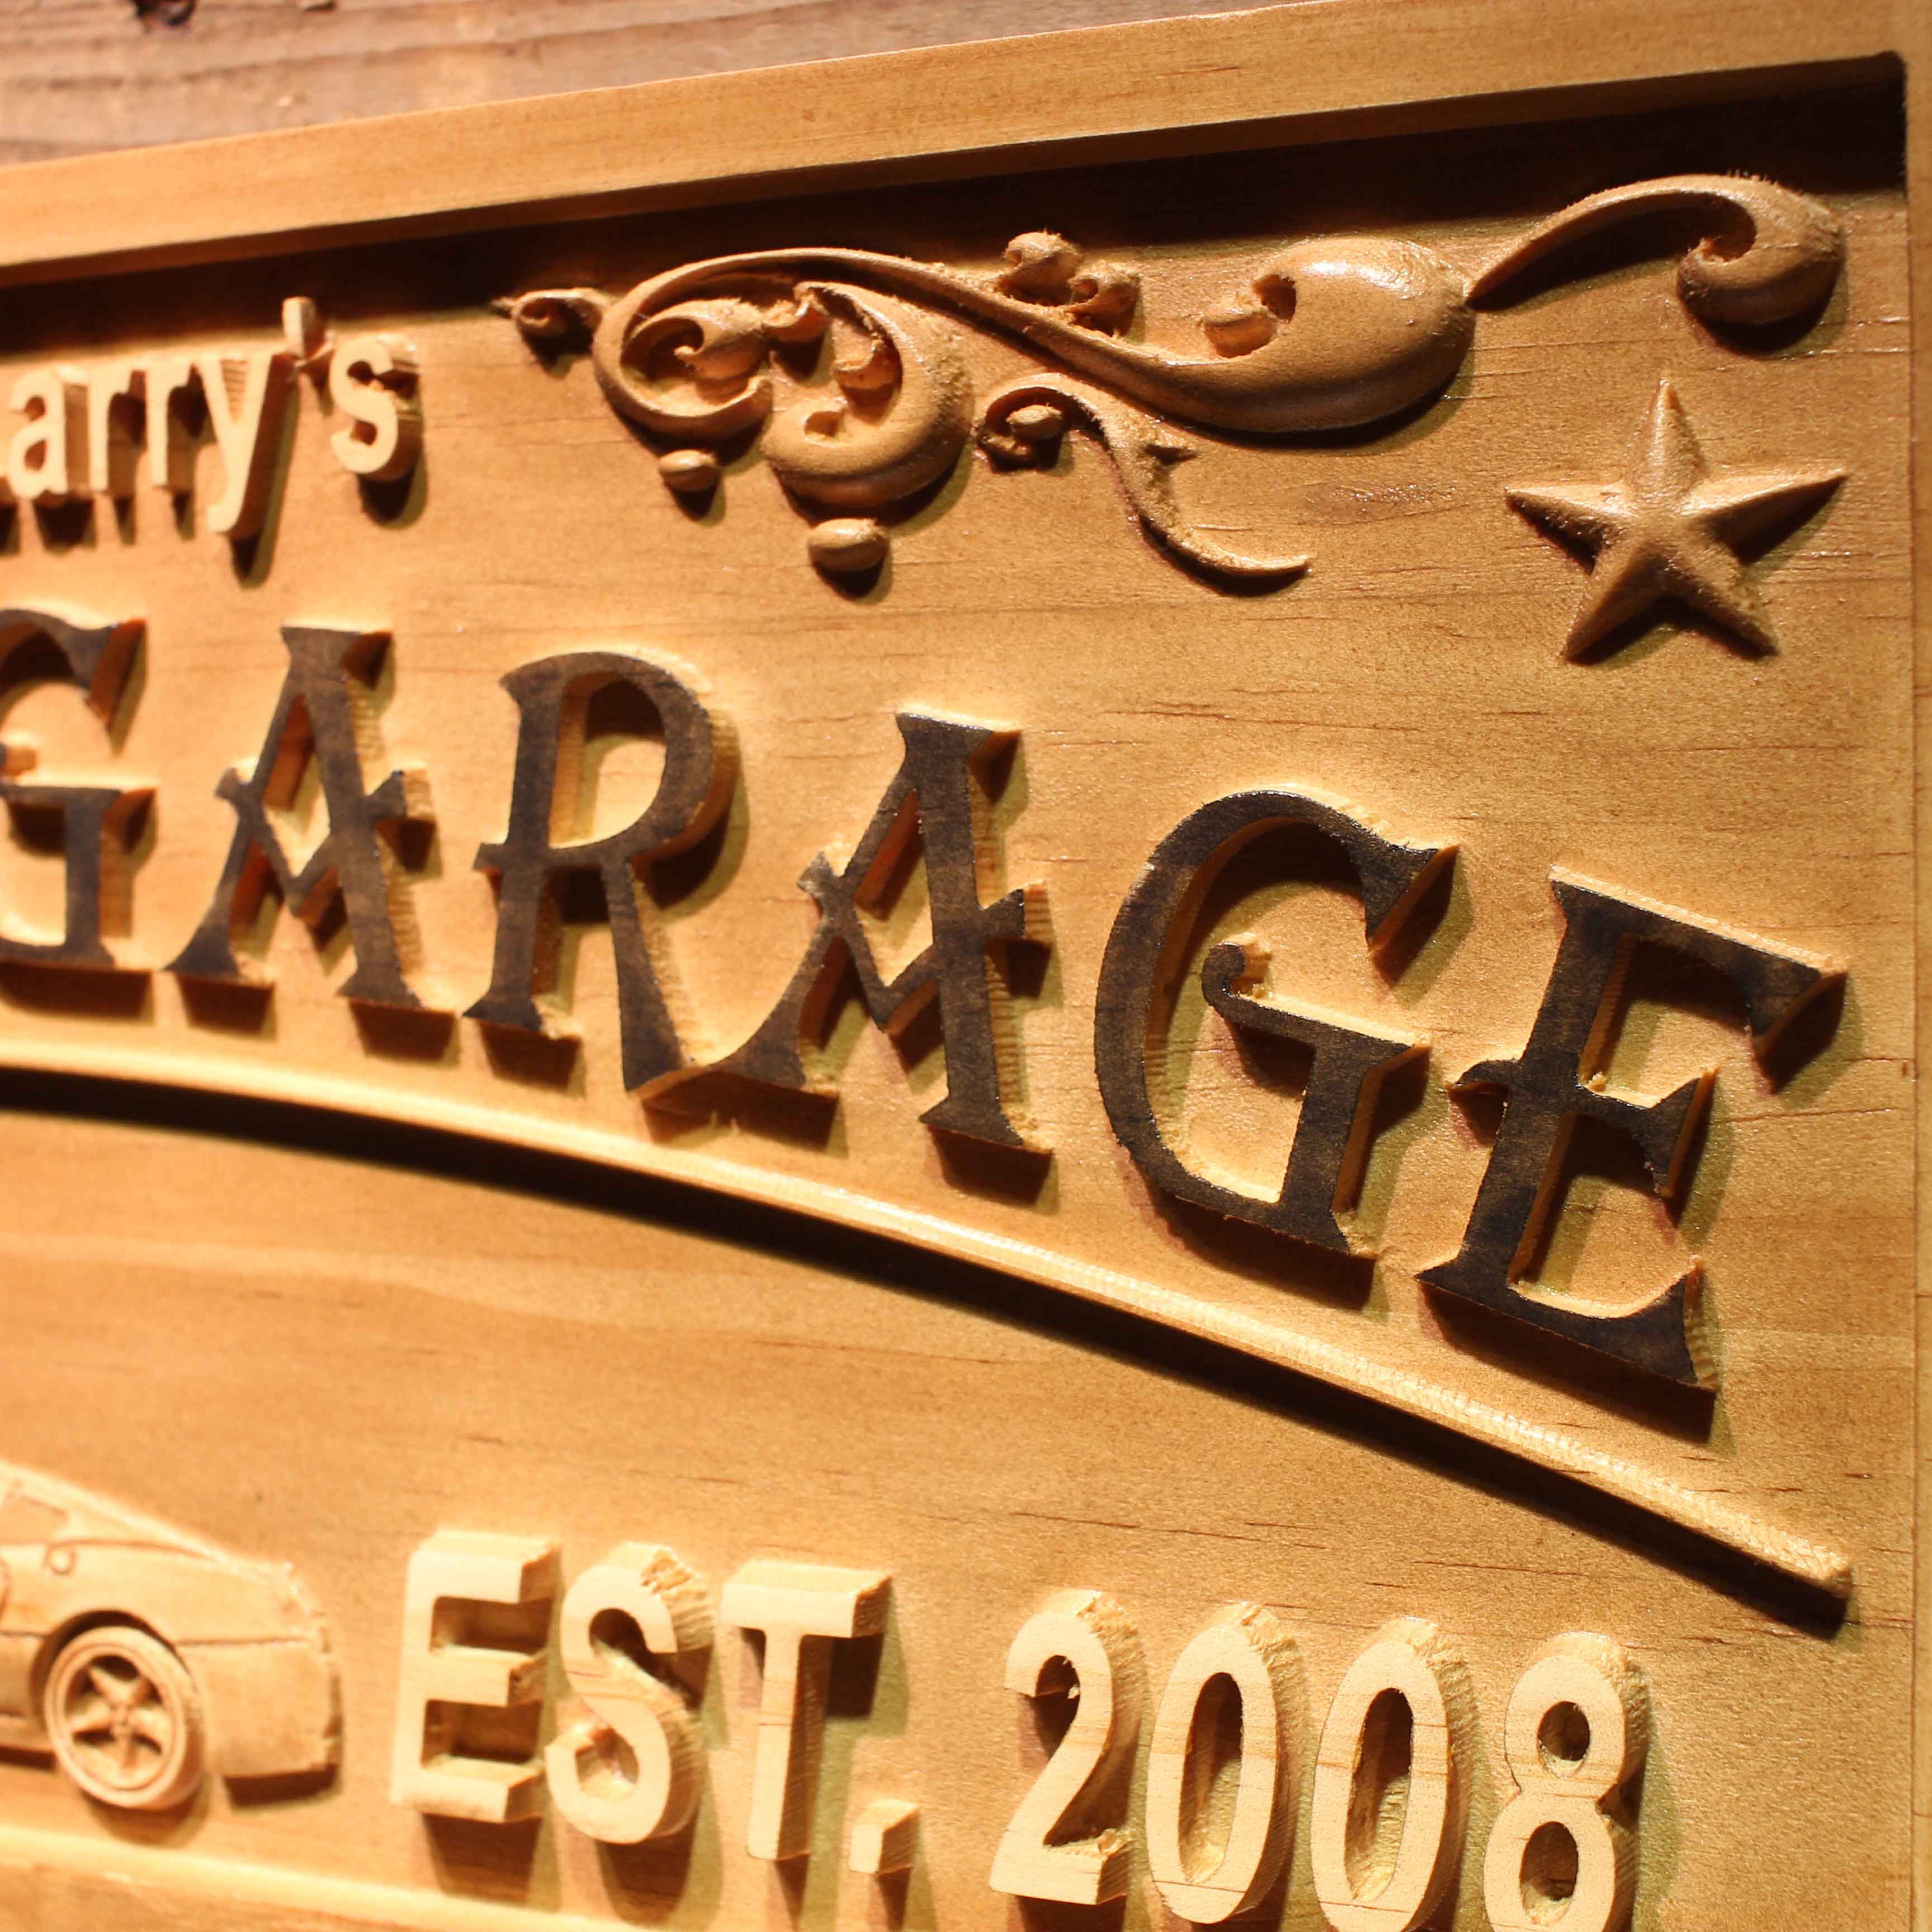 wpa0405 MUSCLE CAR GARAGE Name Personalized with Est Year Wood Engraved Wooden Sign